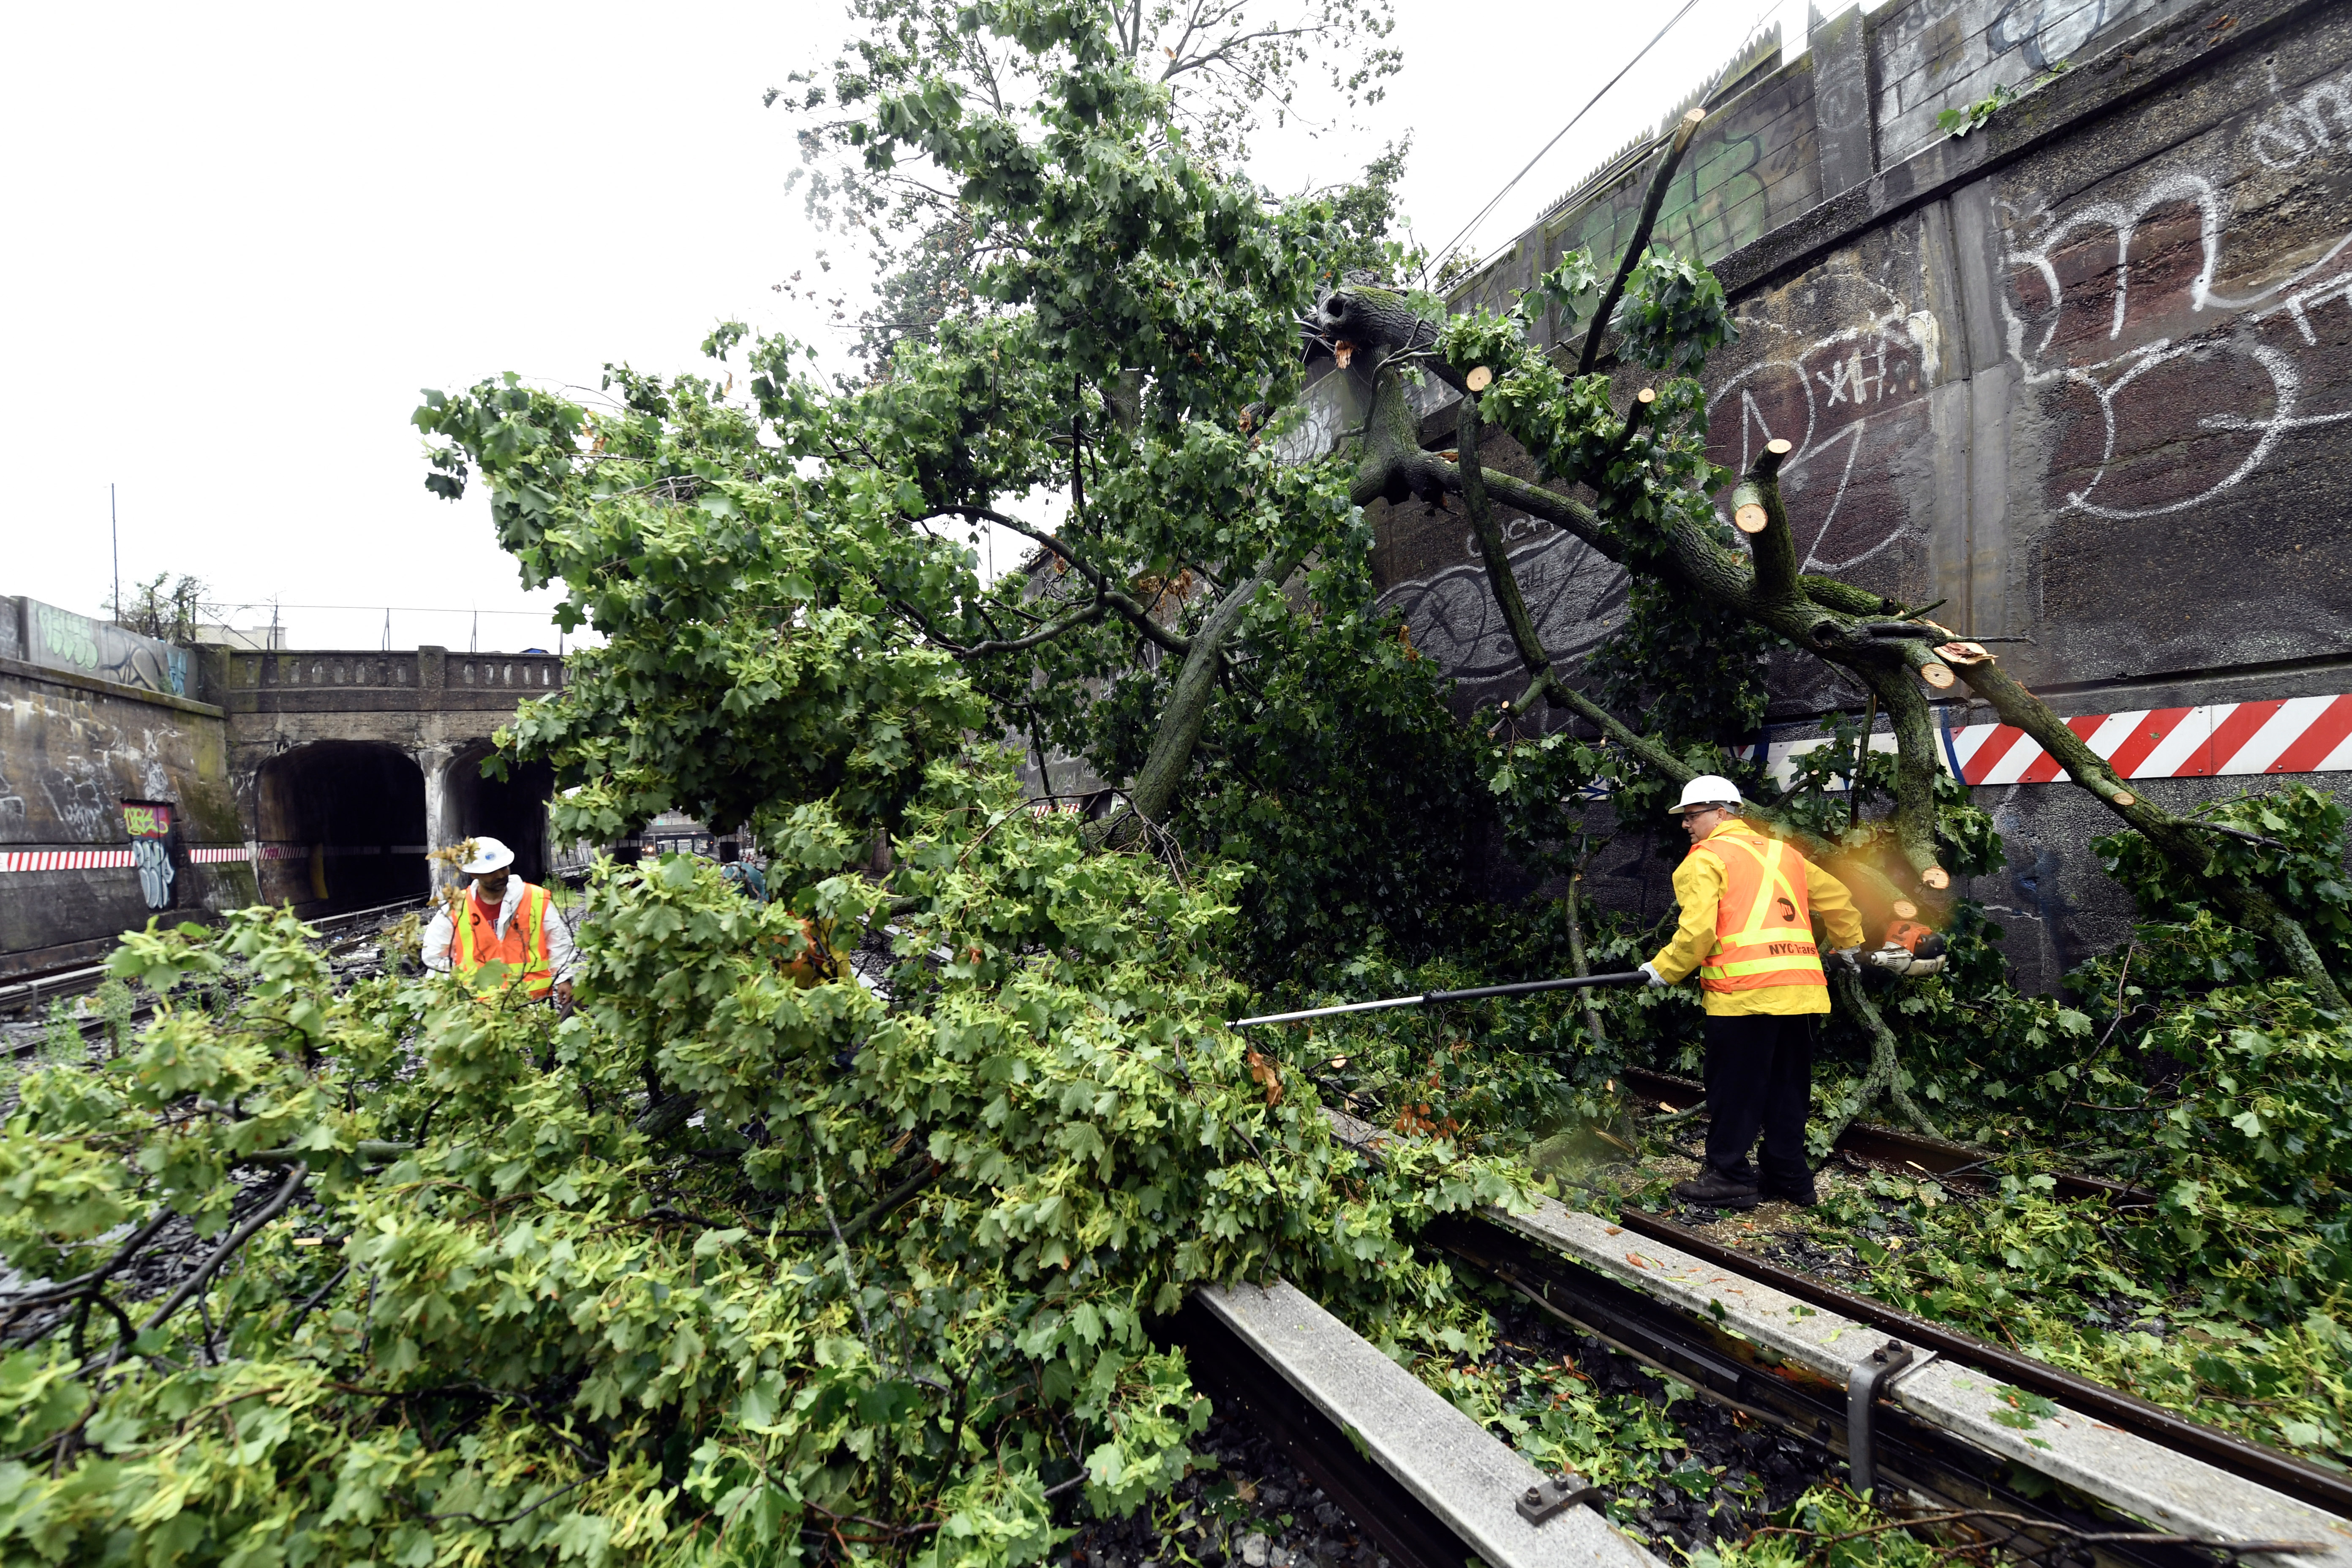 PHOTOS: MTA Crews Work to Remove Fallen Tree from Tracks in Brooklyn 